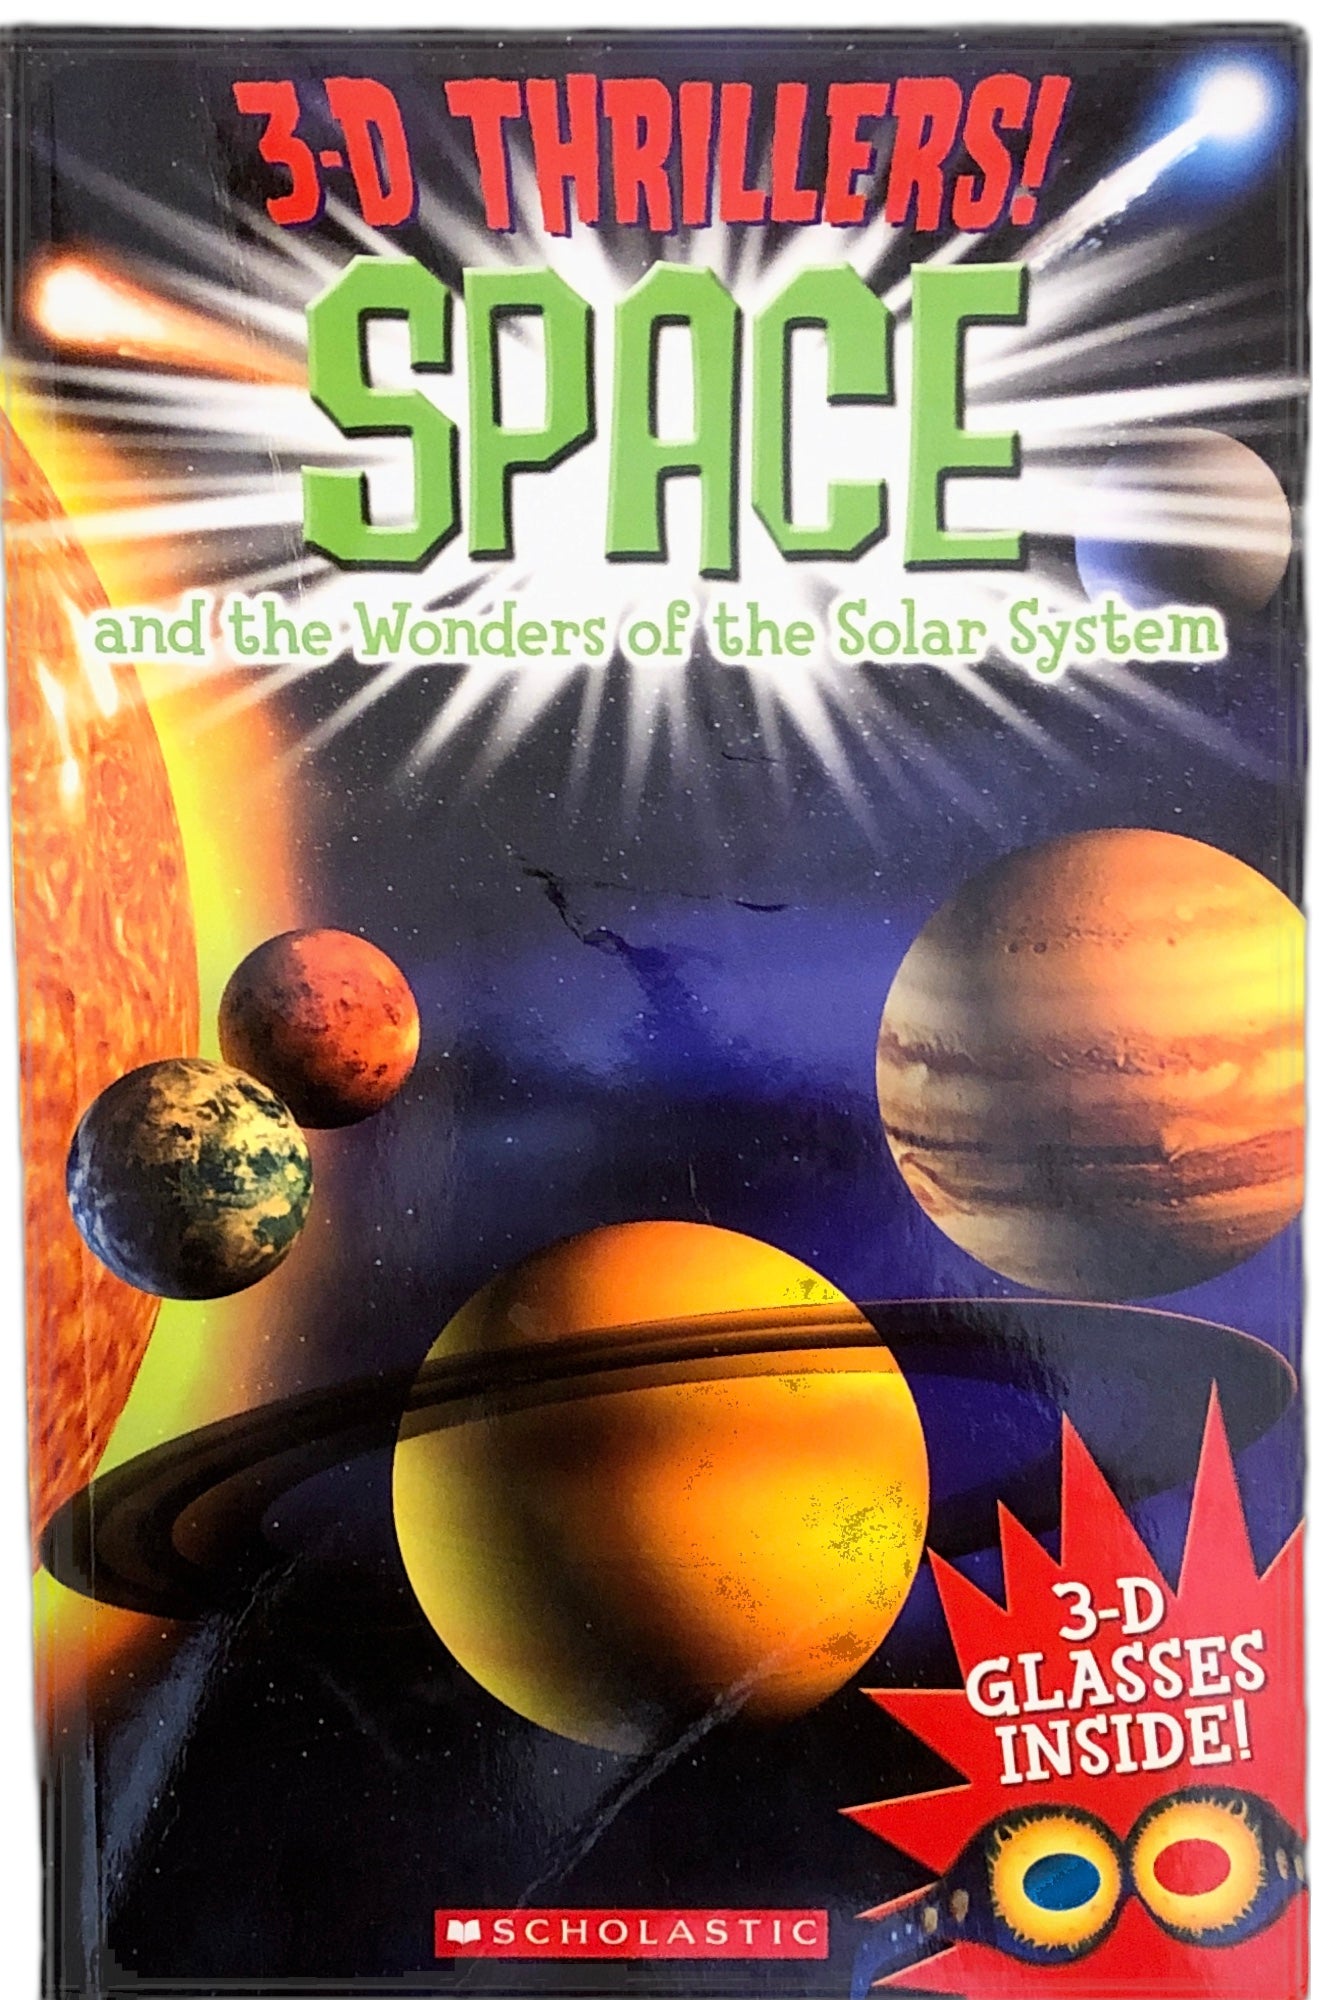 3-D Thrillers! Space and the Wonders of the Solar System by Paul Harrison